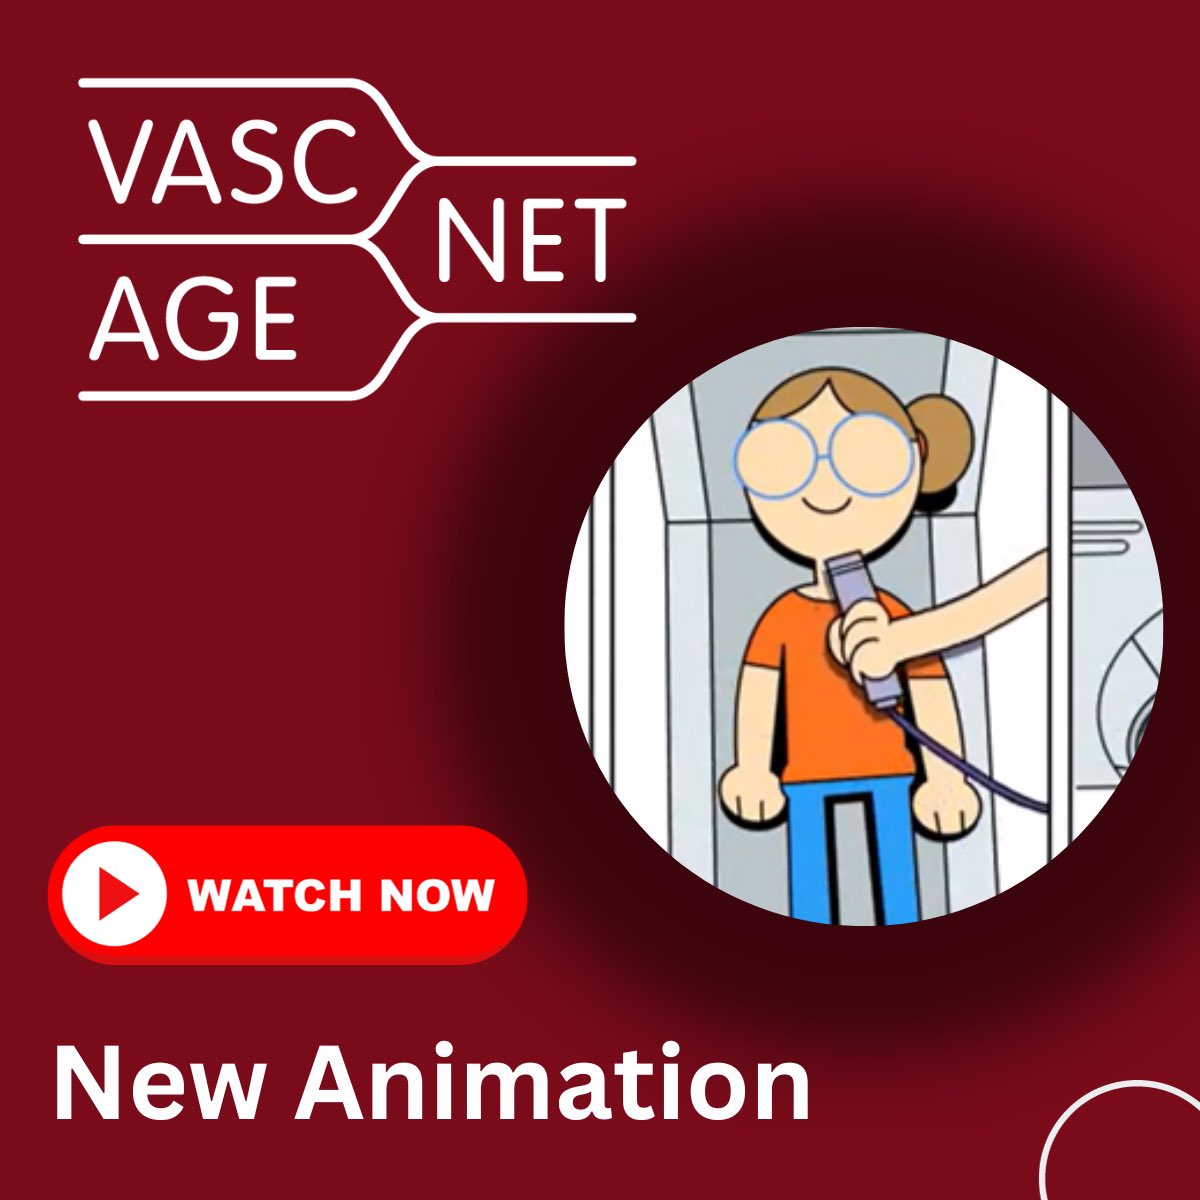 Exciting news! We are pleased to announce our latest animation: Vascular Ageing for Clinicians by @RIVAIllustrati1 youtu.be/mjA-GtYu04E?si… #vascularageing #education #awareness #vasculartwitter #CVD